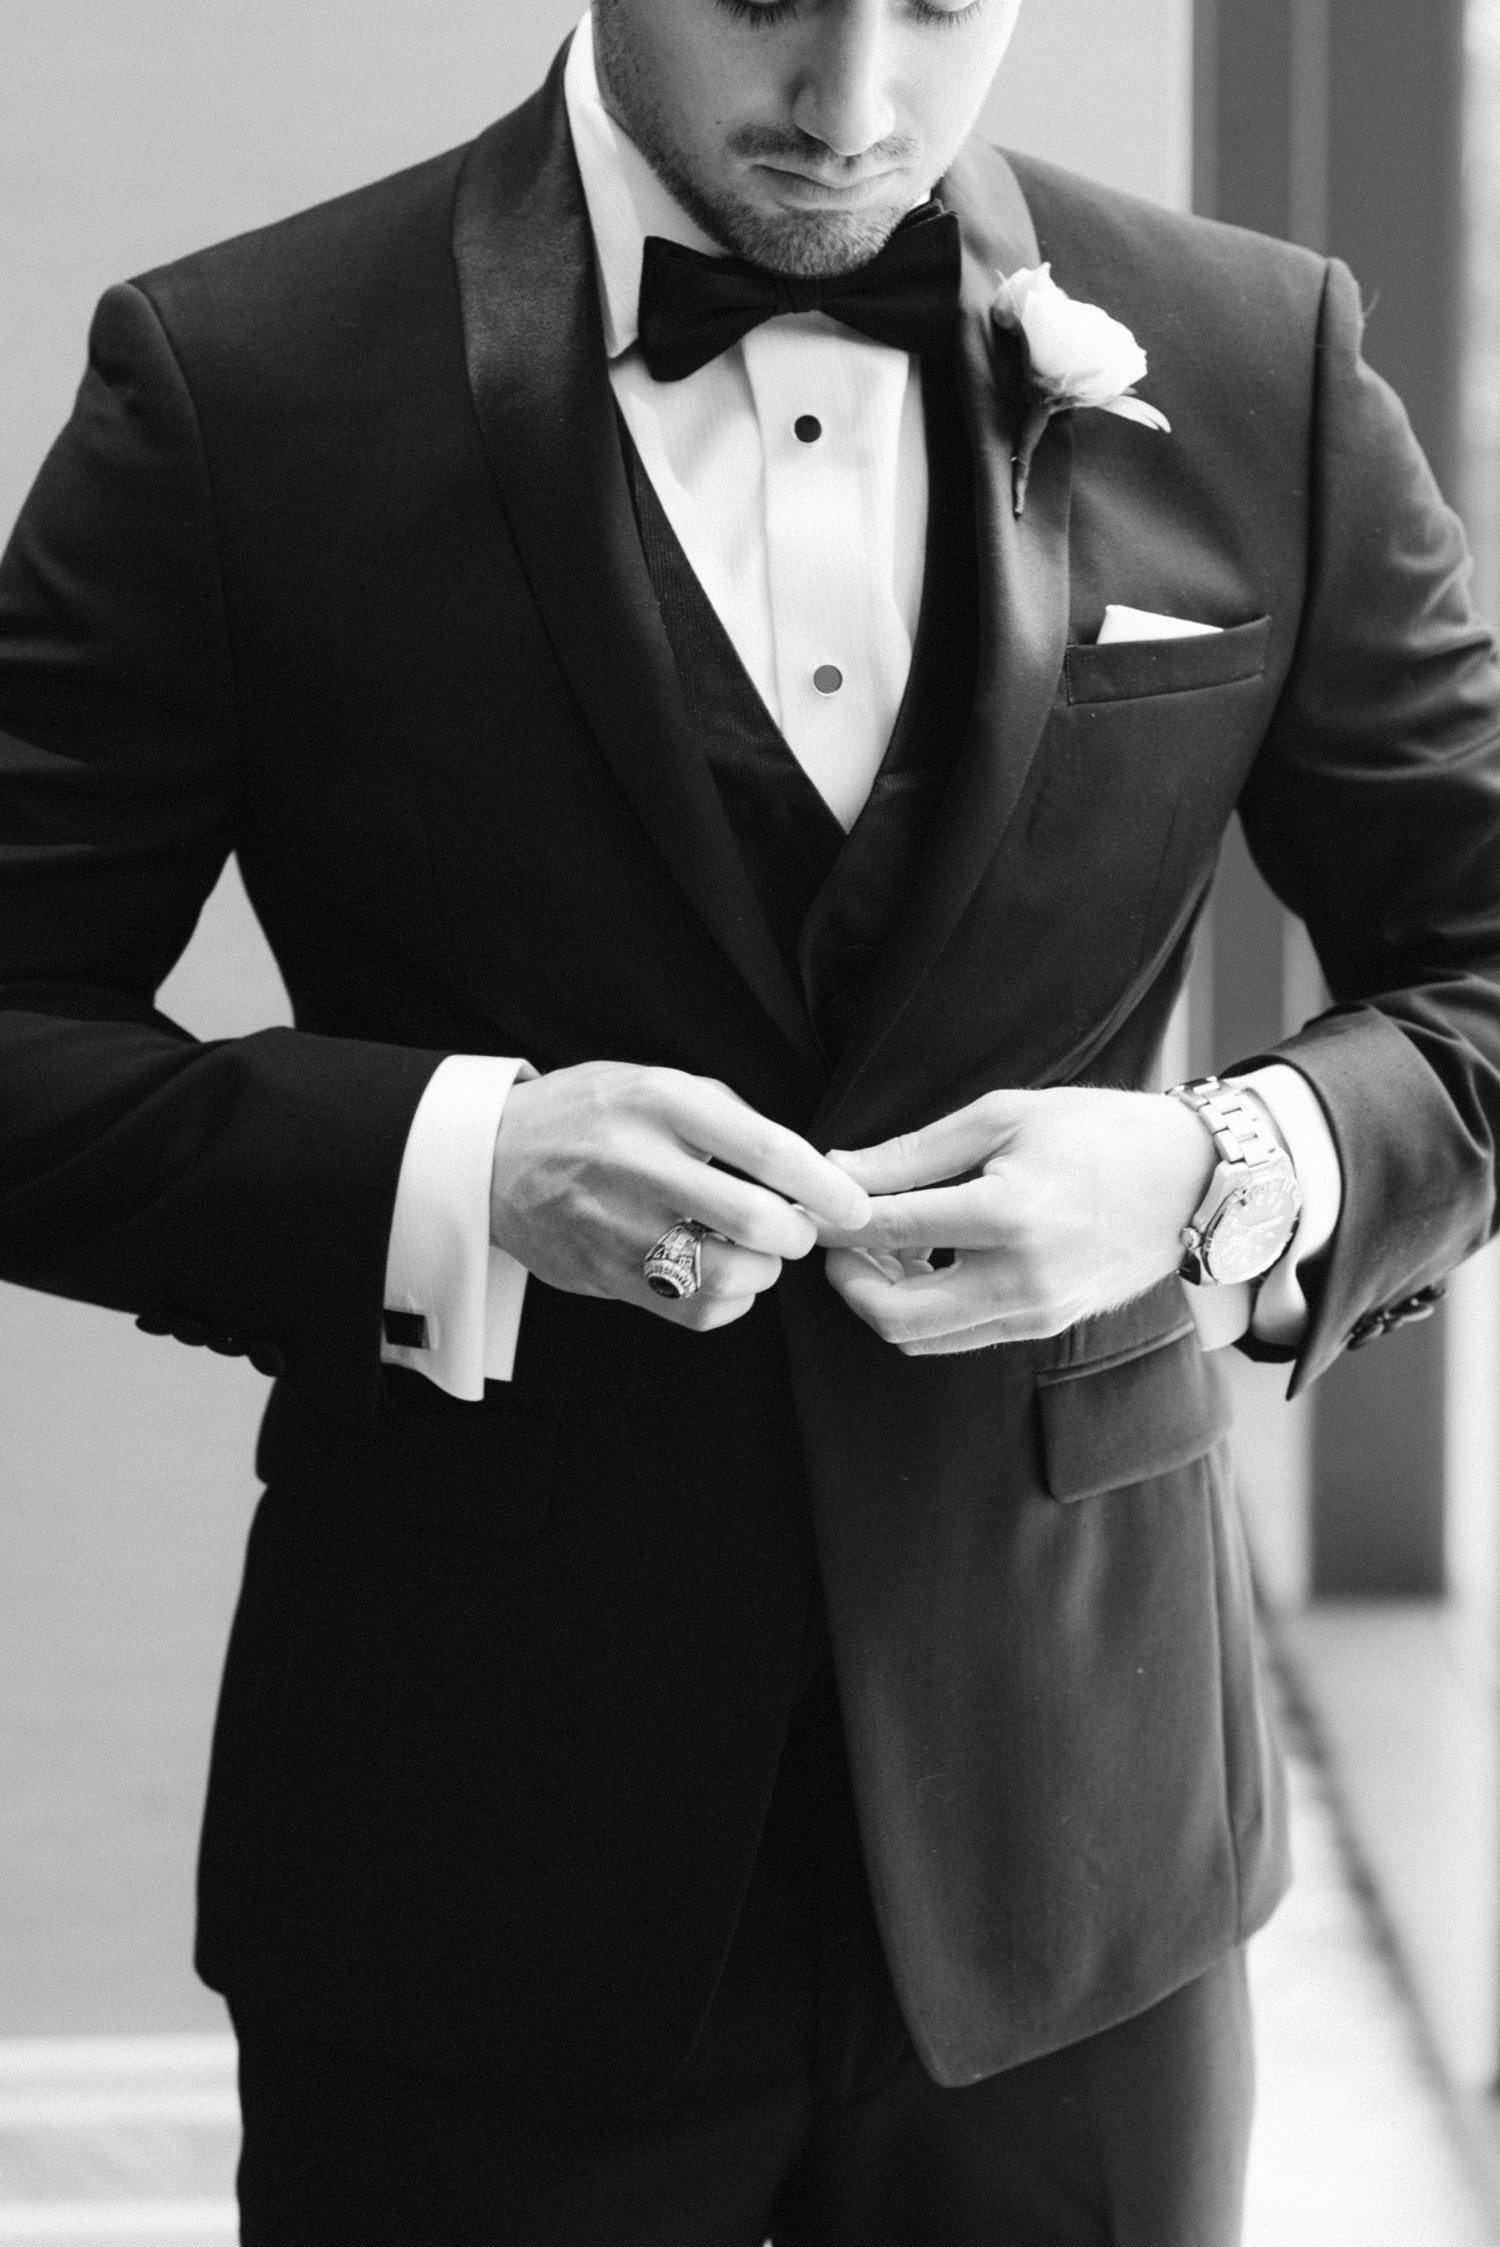 Groom Buttoning Suit